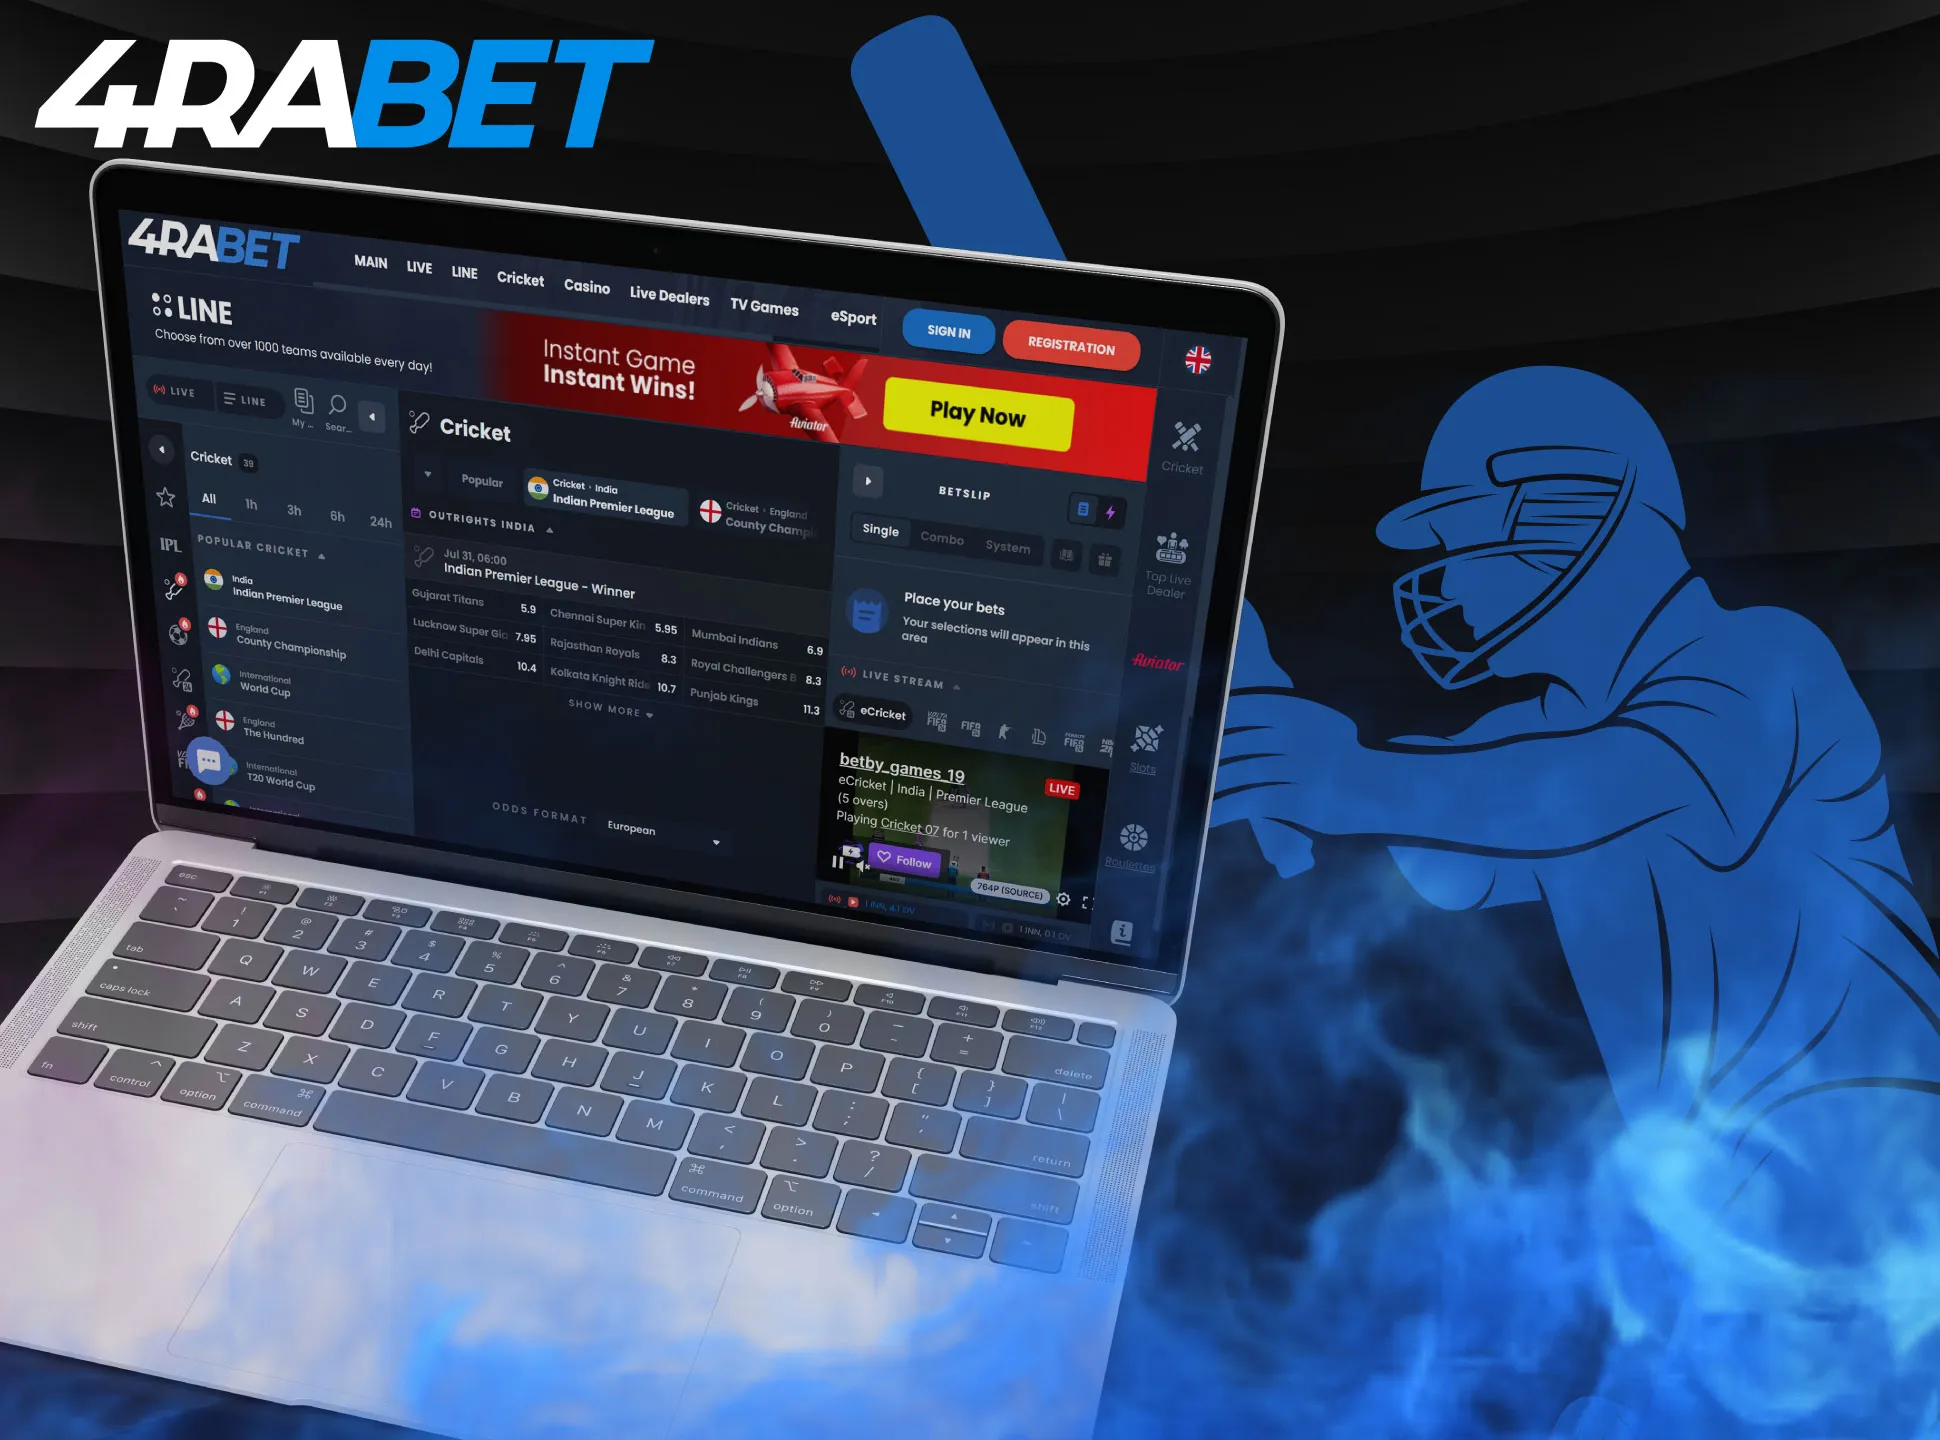 Go to the 4rabet account, deposit money, choose a sports match and place a bet on your chosen team.